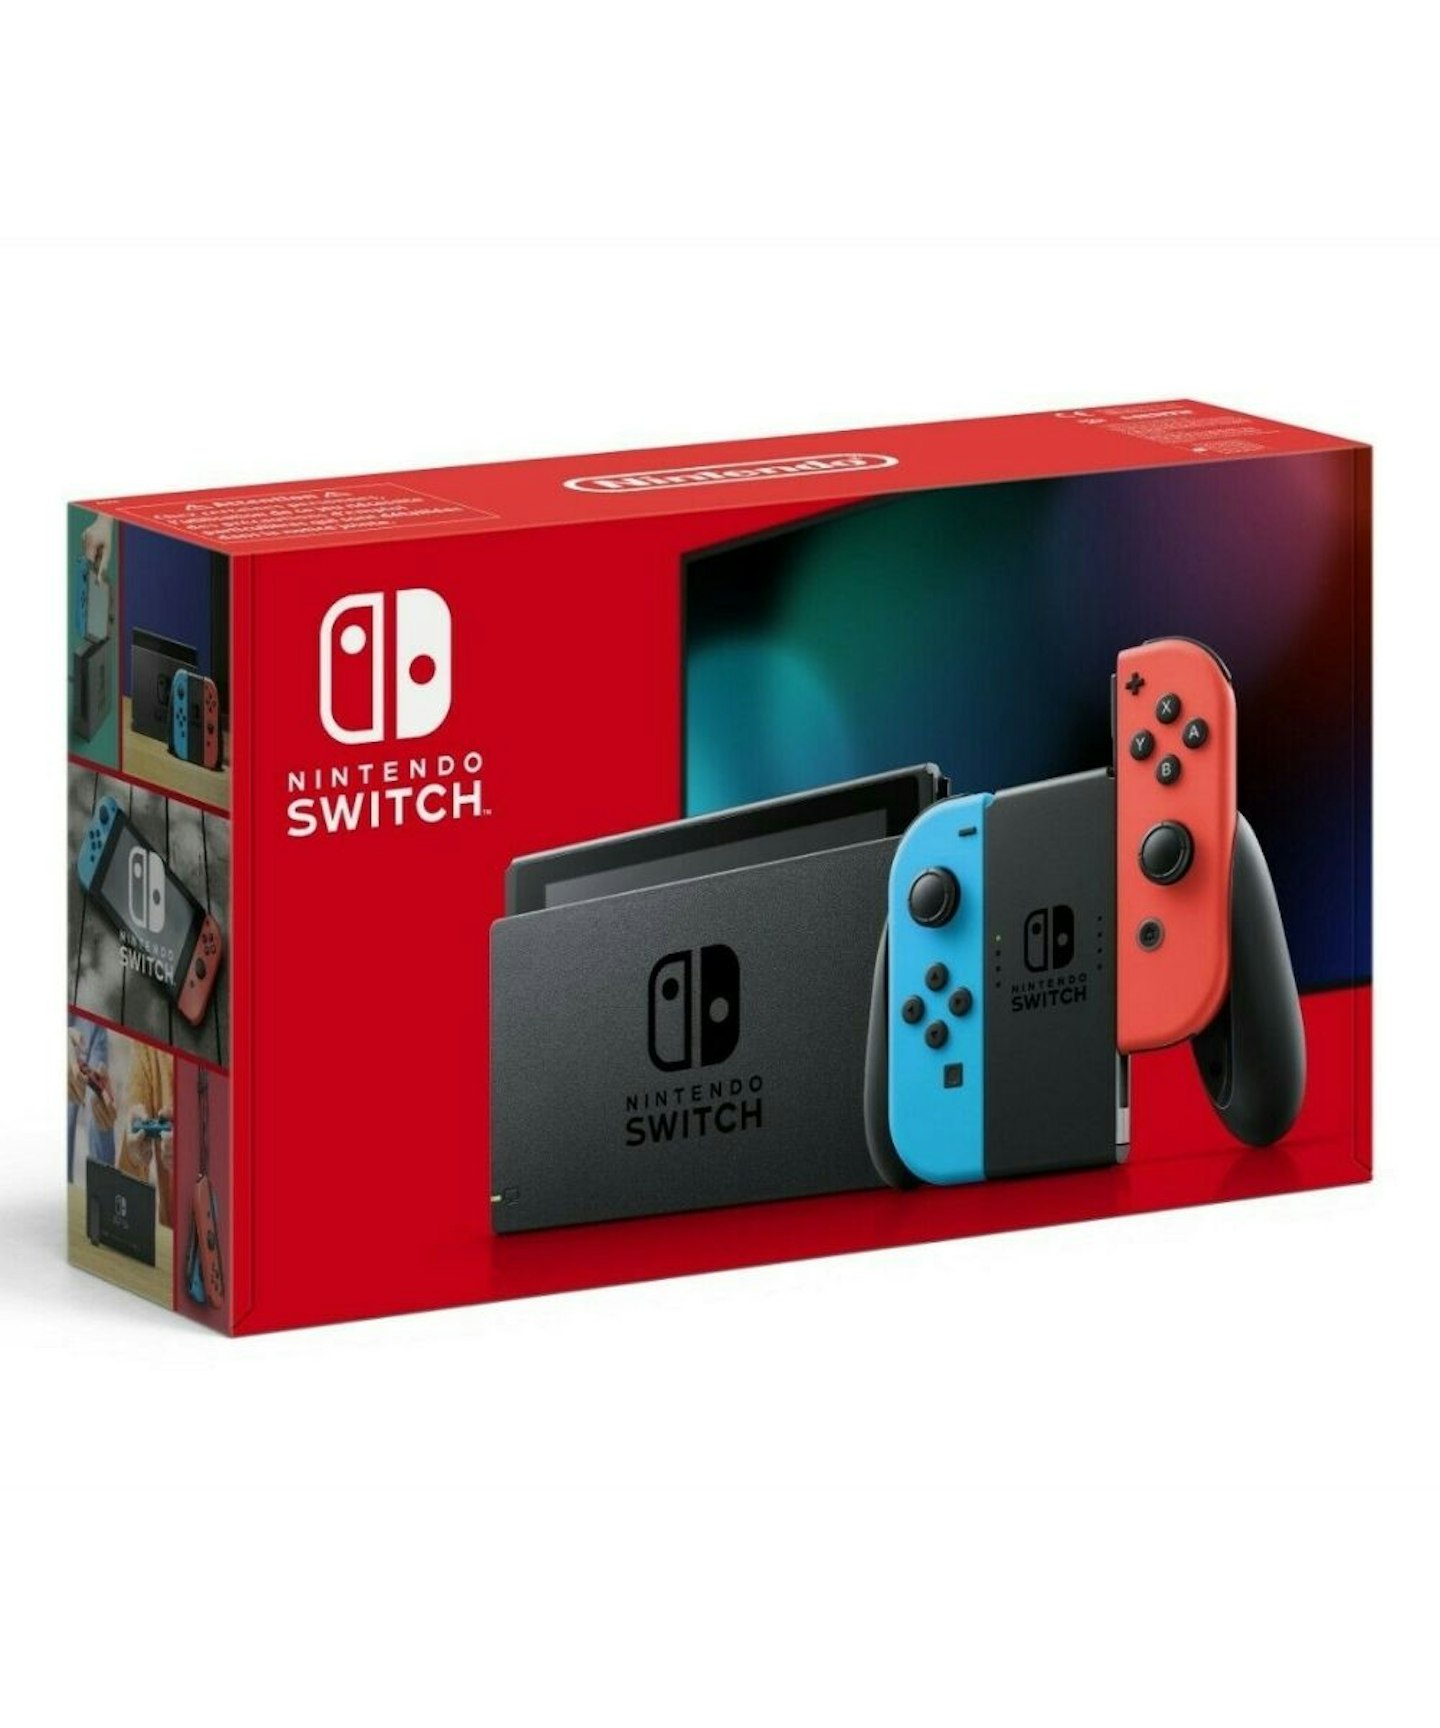 Nintendo Switch Neon Red and Blue